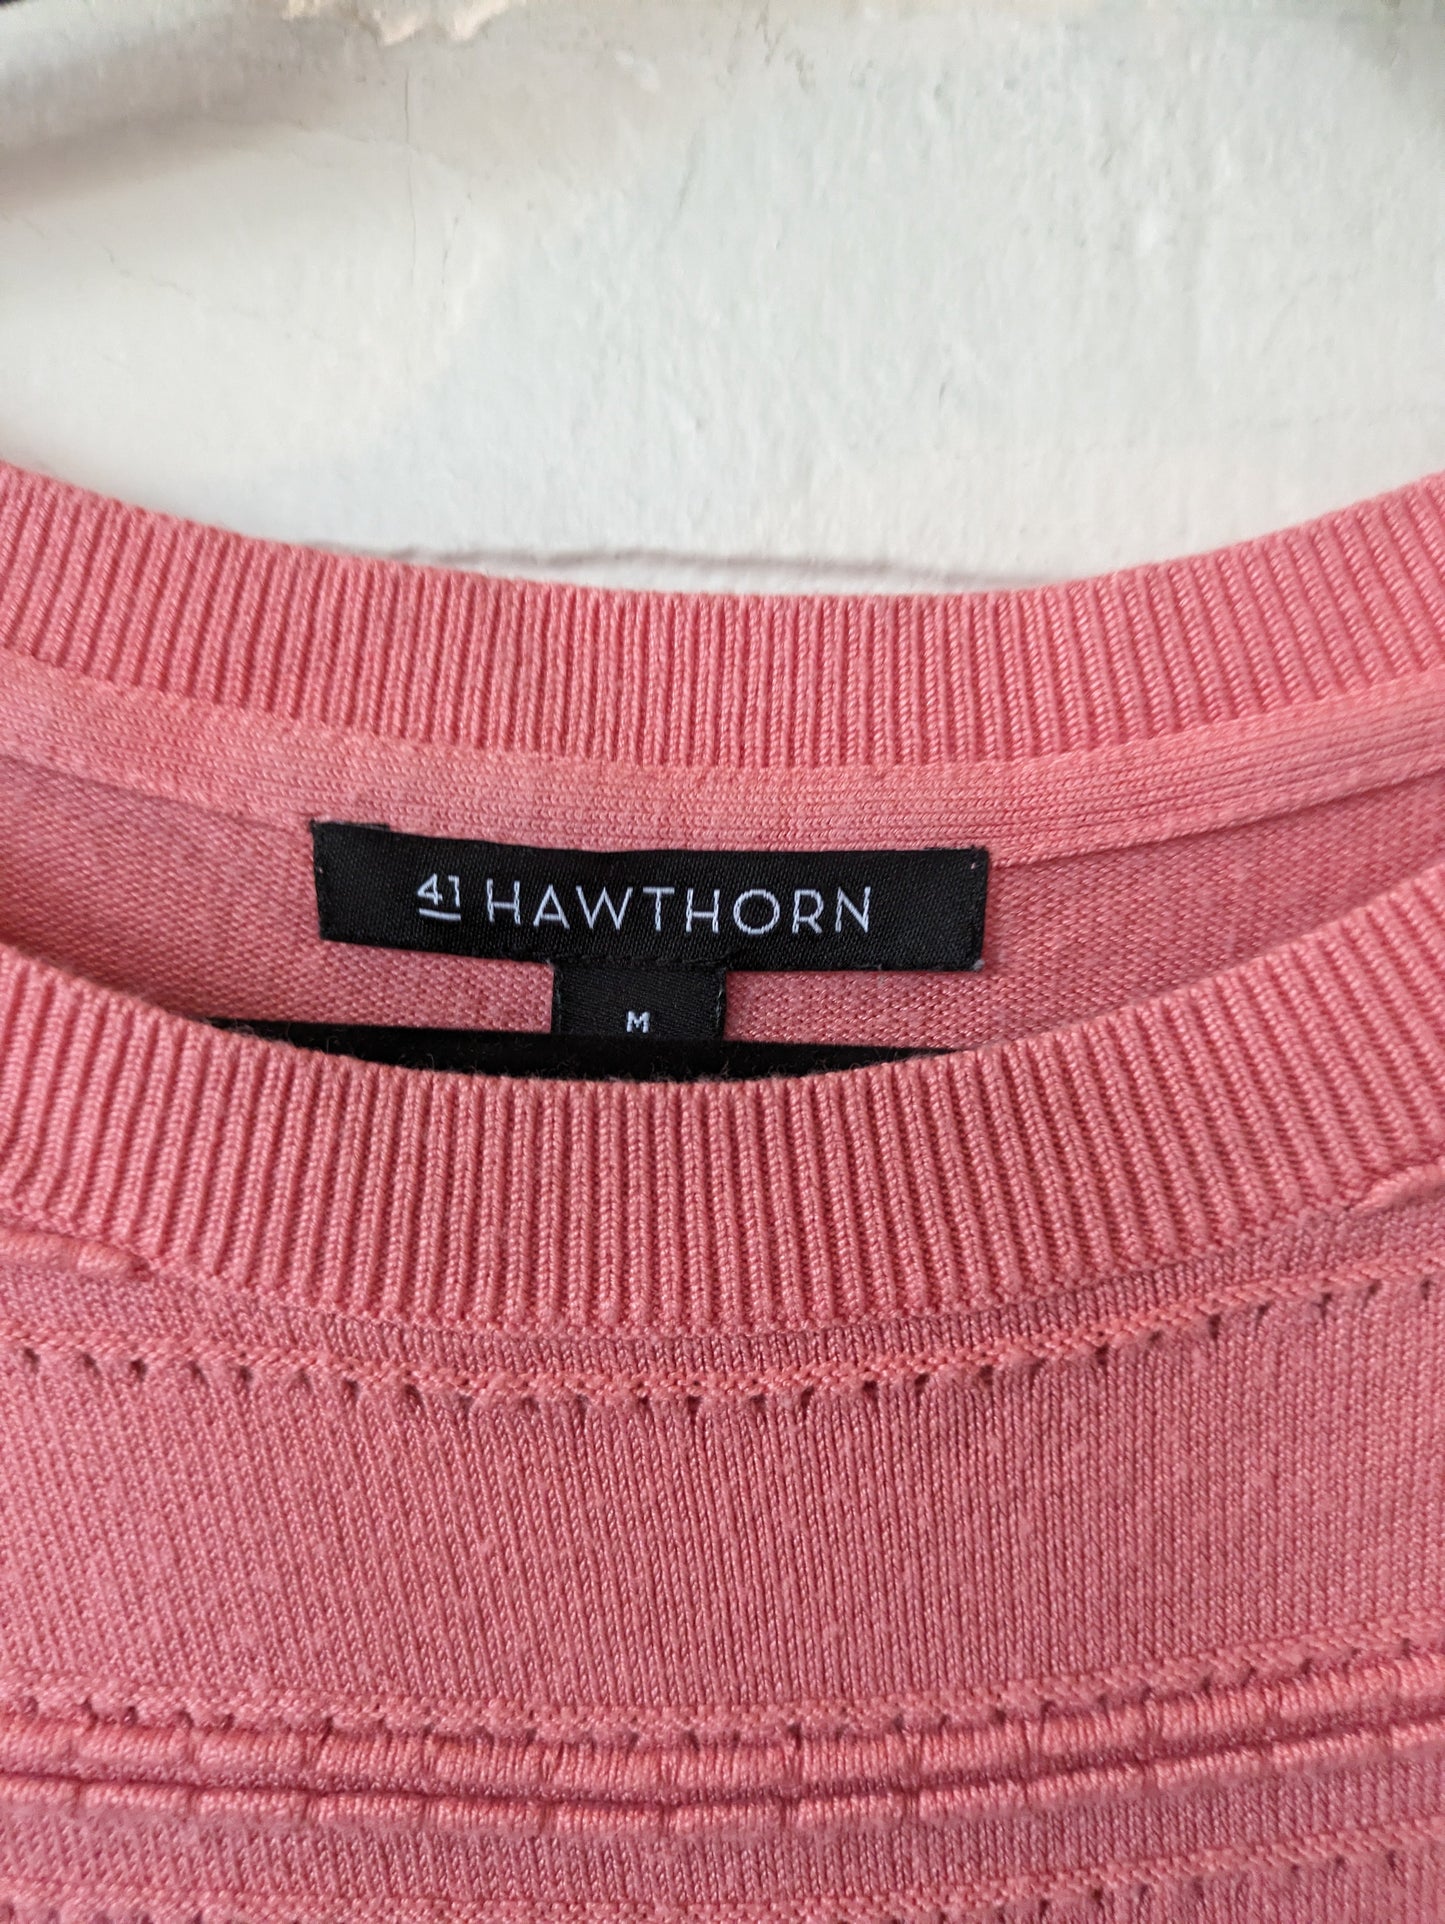 Sweater By Hawthorn  Size: M